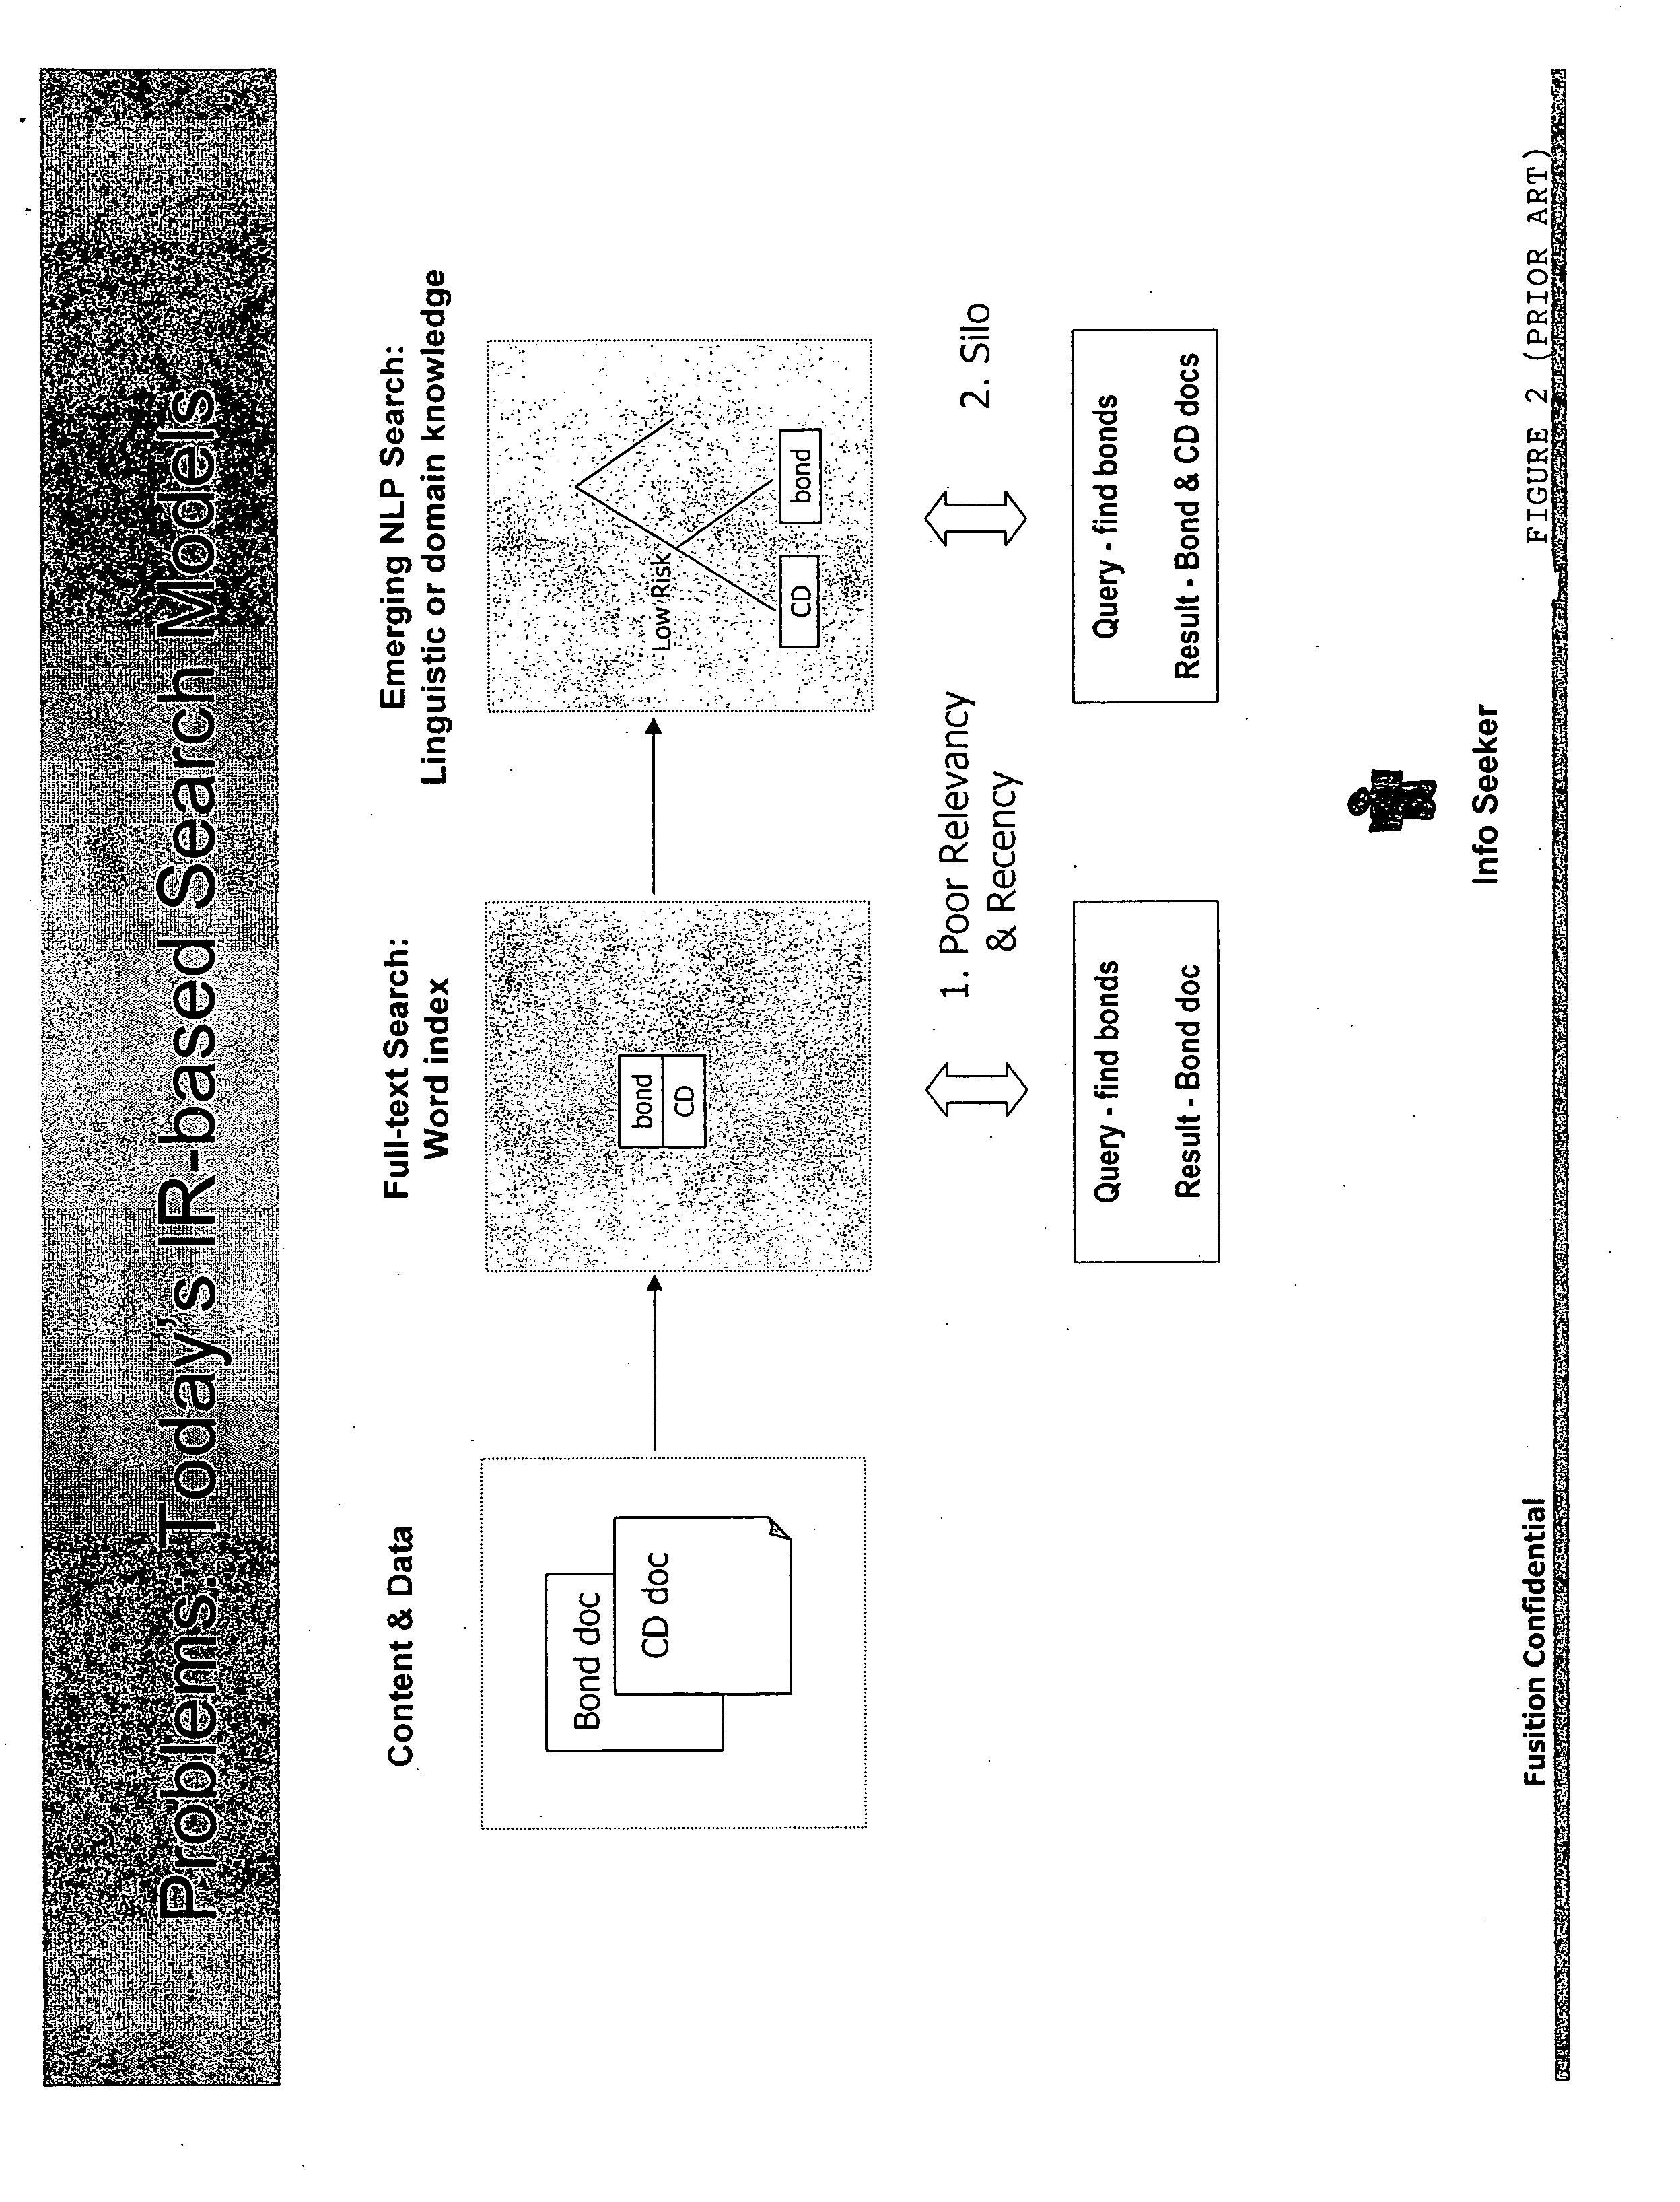 Method and apparatus for suggesting/disambiguation query terms based upon usage patterns observed